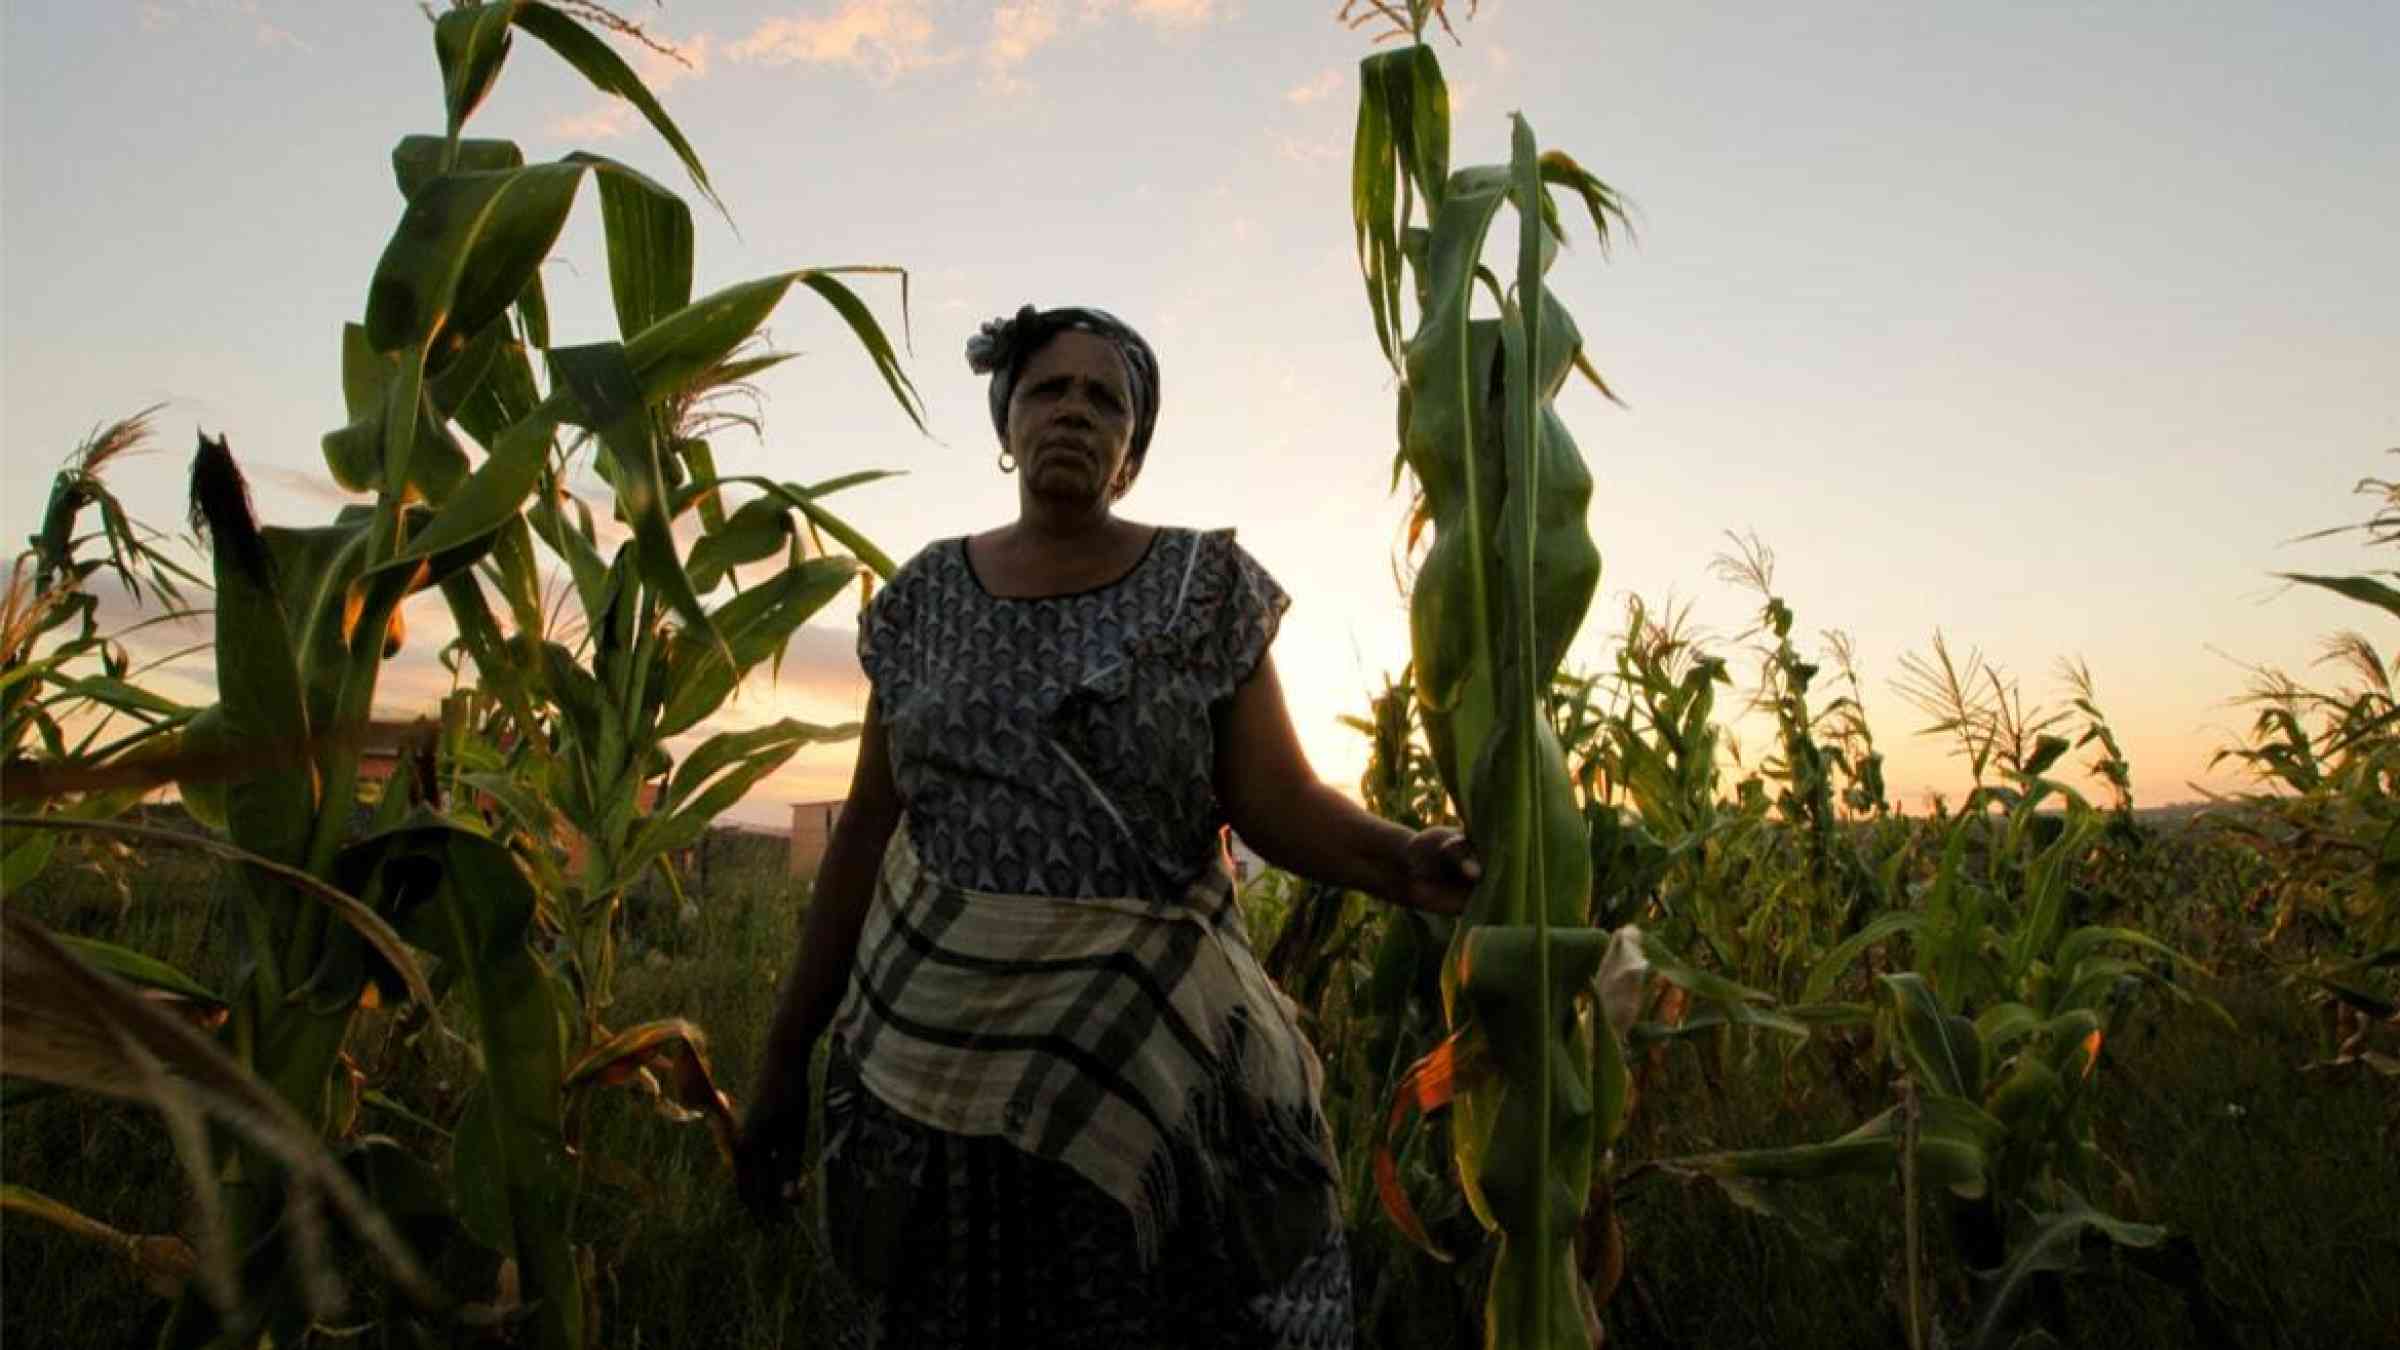 Woman stands next to her crops in evening light